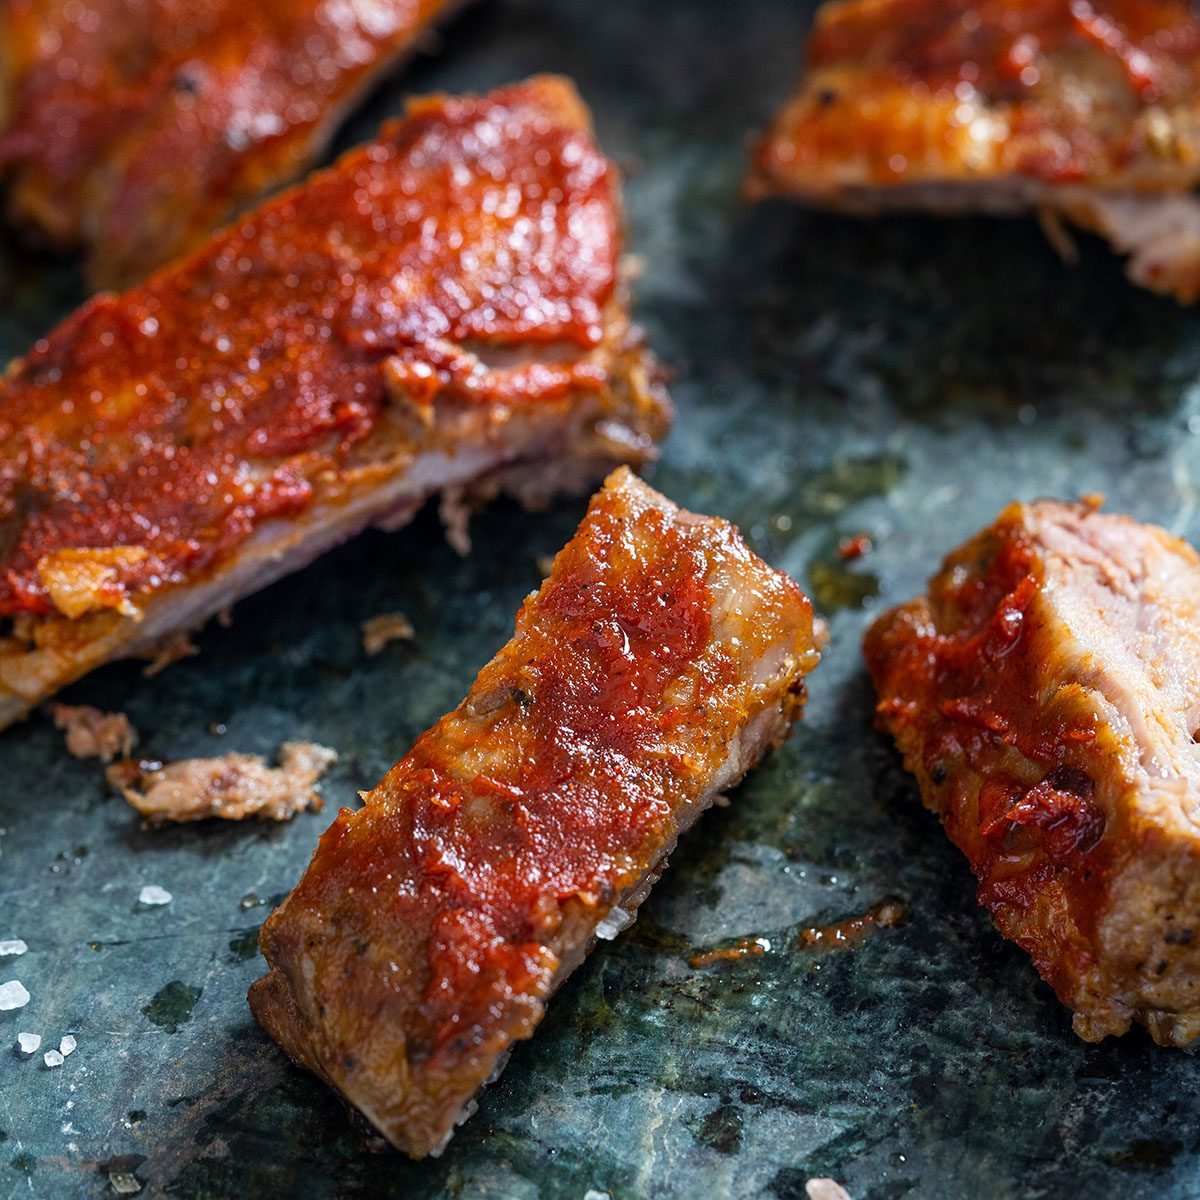 Spare ribs with bbq sauce